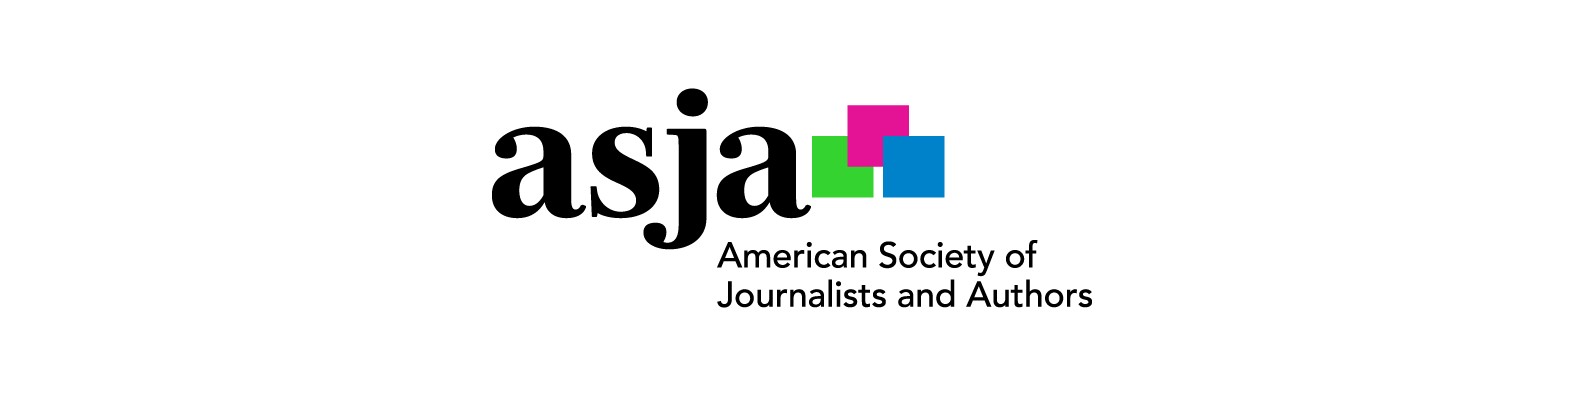 Logo: American Society of Journalists and Authors (asja)